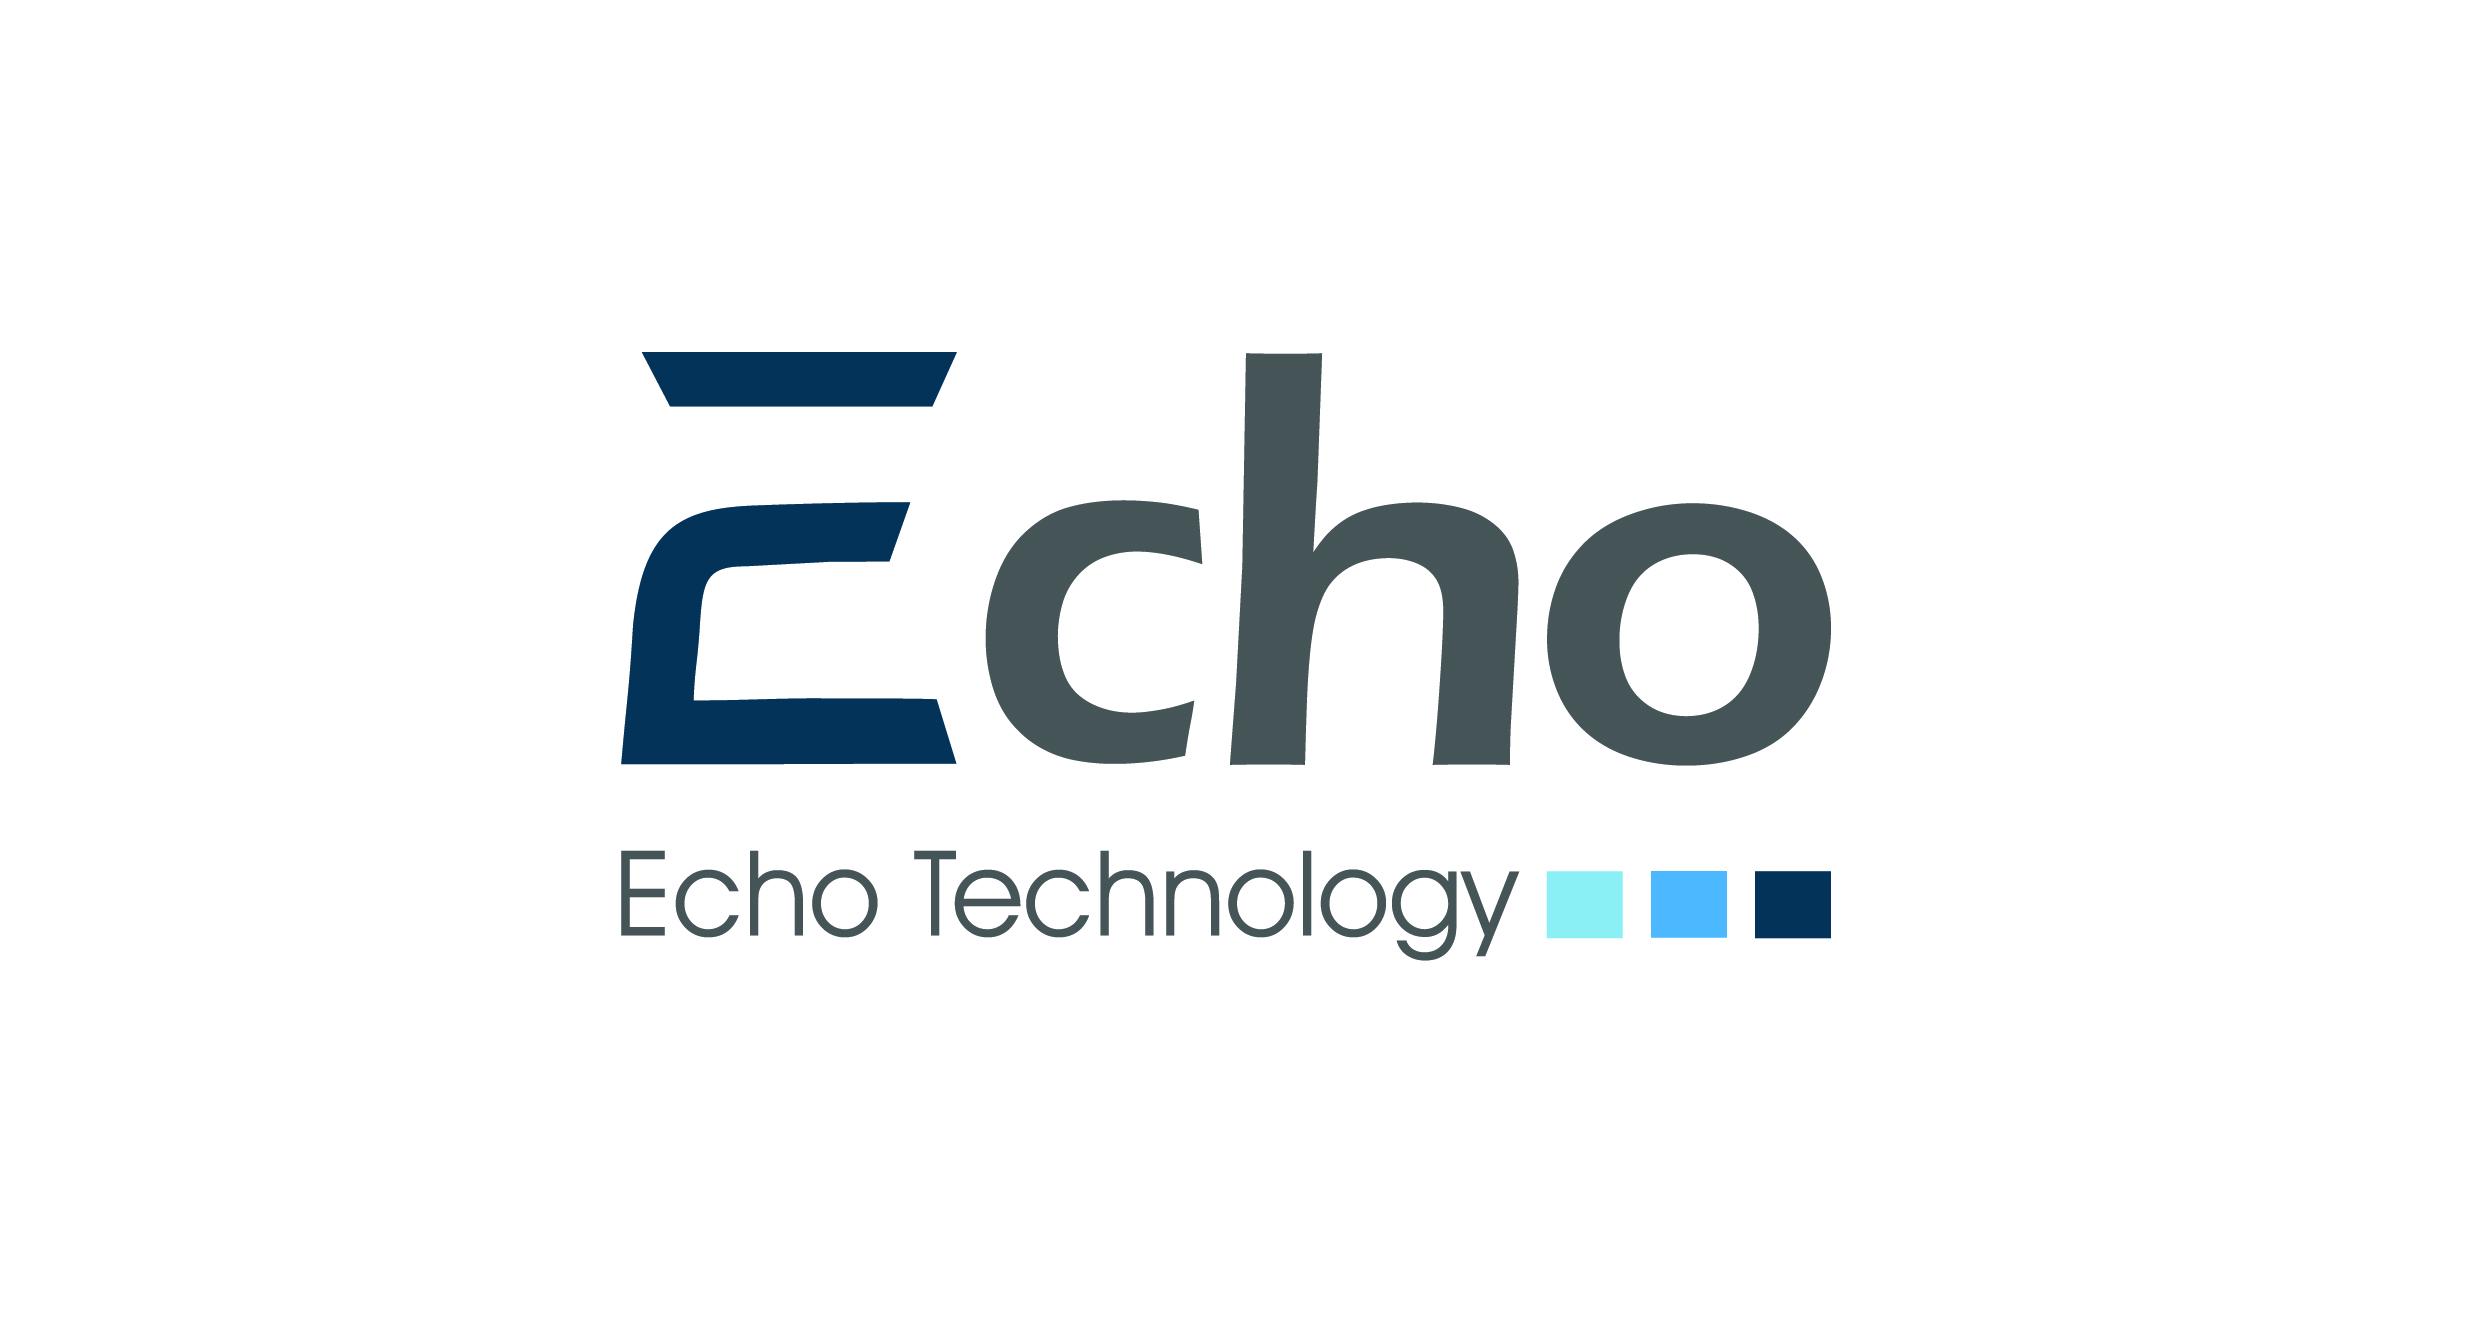 Echo Technology profile on Qualified.One